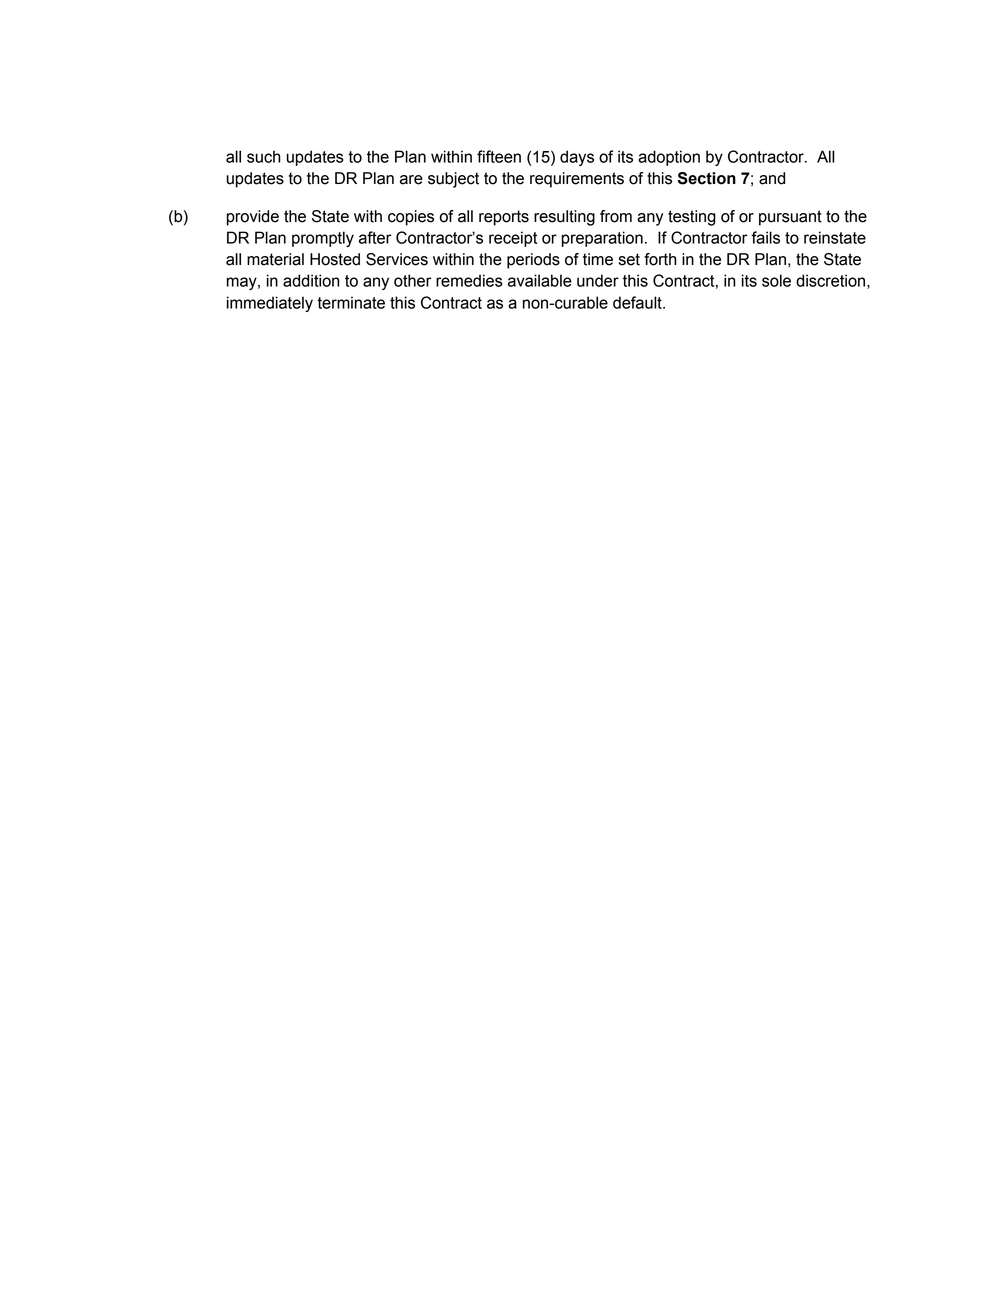 Page 69 from State of Michigan 2020 Kaseware contract